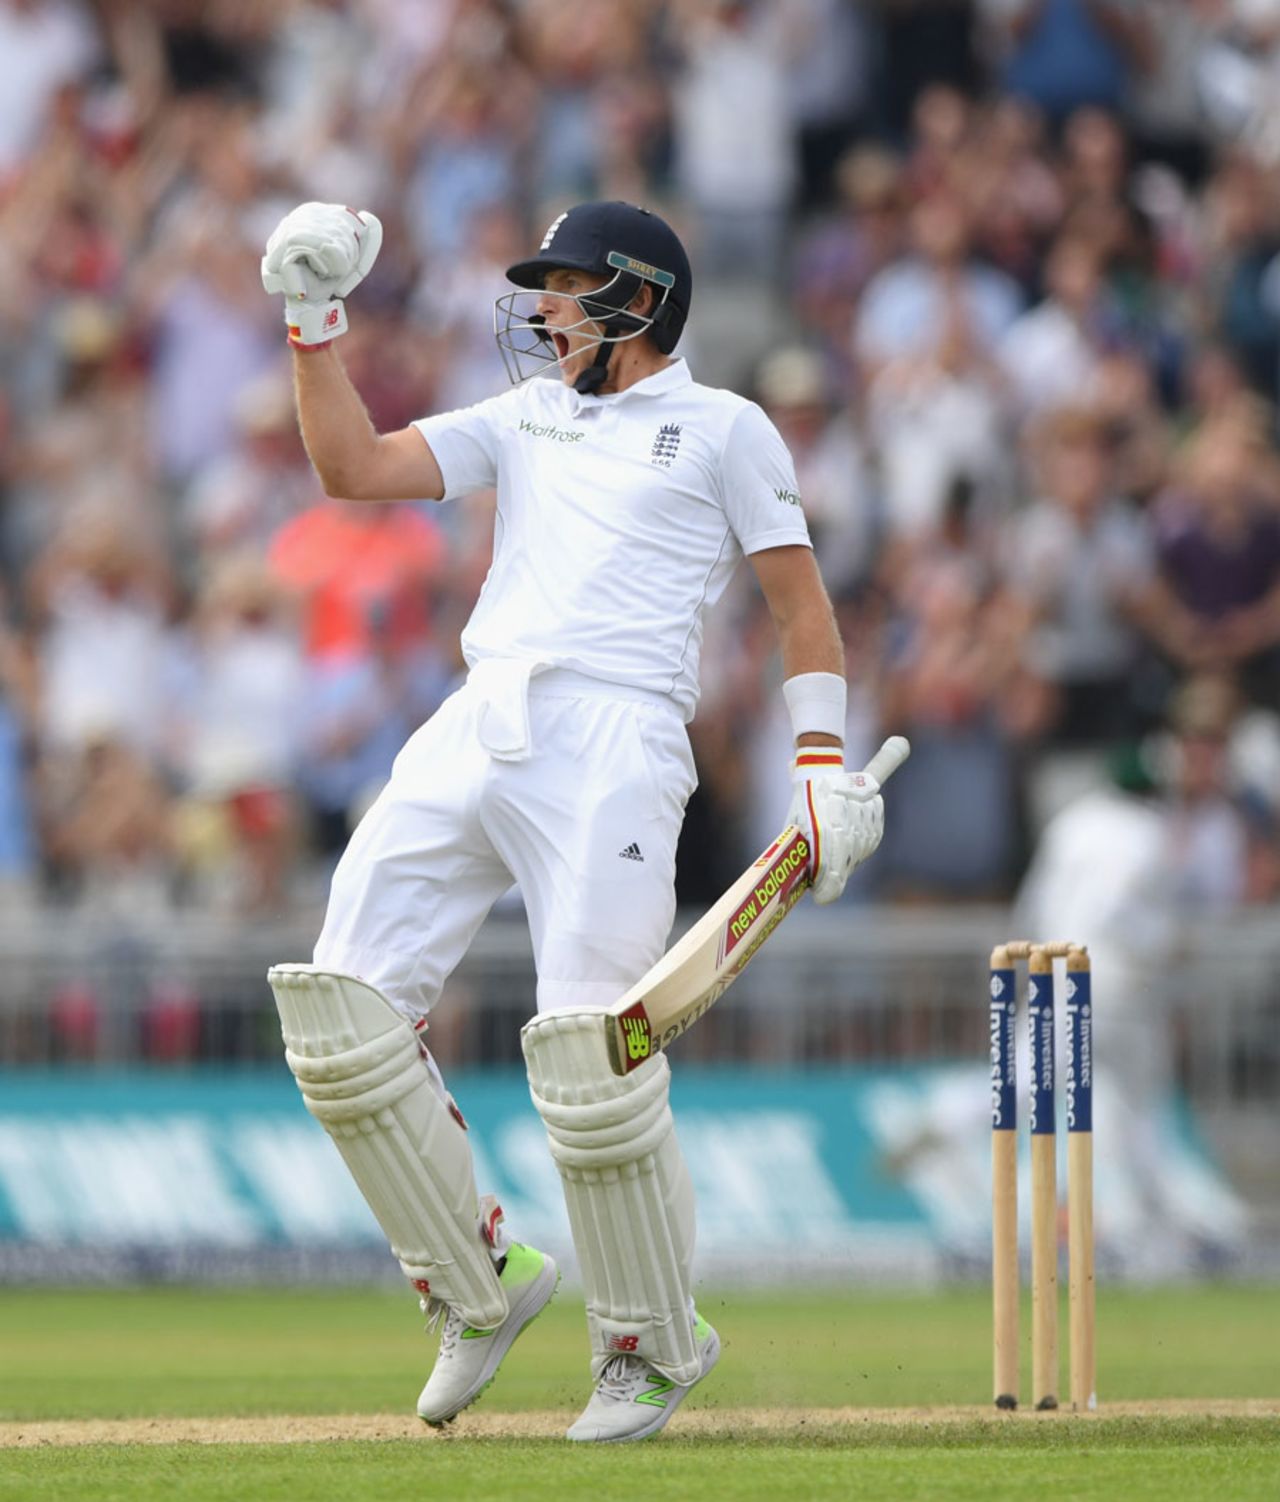 Joe Root punches the air after bringing up his second Test double-century, England v Pakistan, 2nd Investec Test, Old Trafford, 2nd day, July 23, 2016